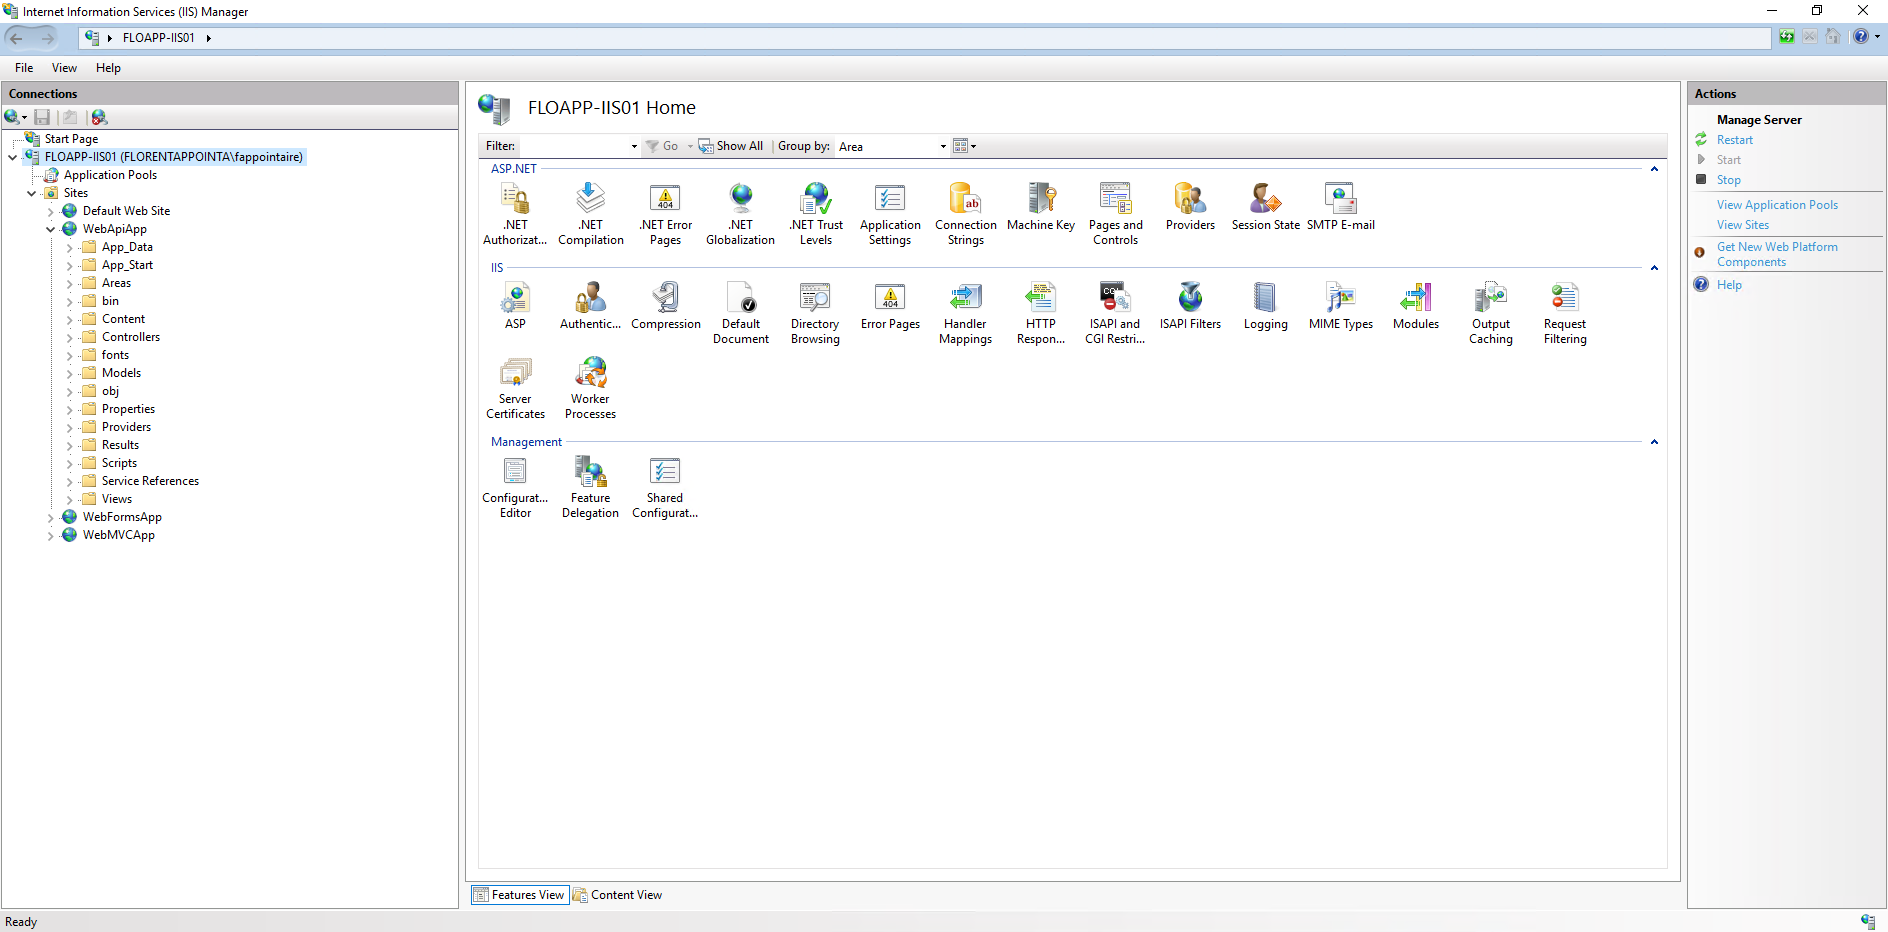 IIS Manager view